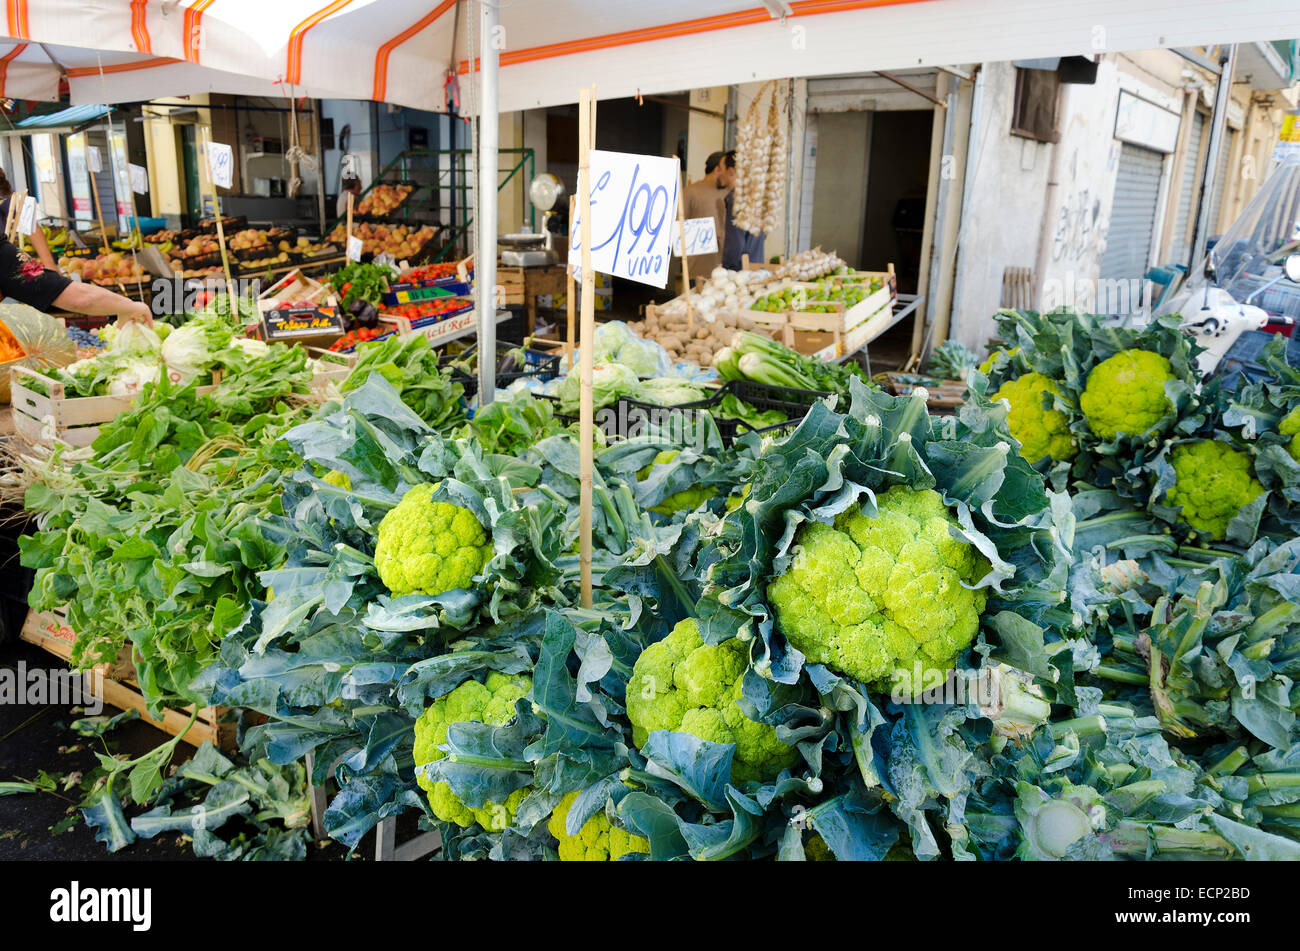 PALERMO, SICILY, ITALY - OCTOBER 3, 2012: A greengrocer street, it is packed with cauliflower, on October 3, 2012 in Palermo, It Stock Photo